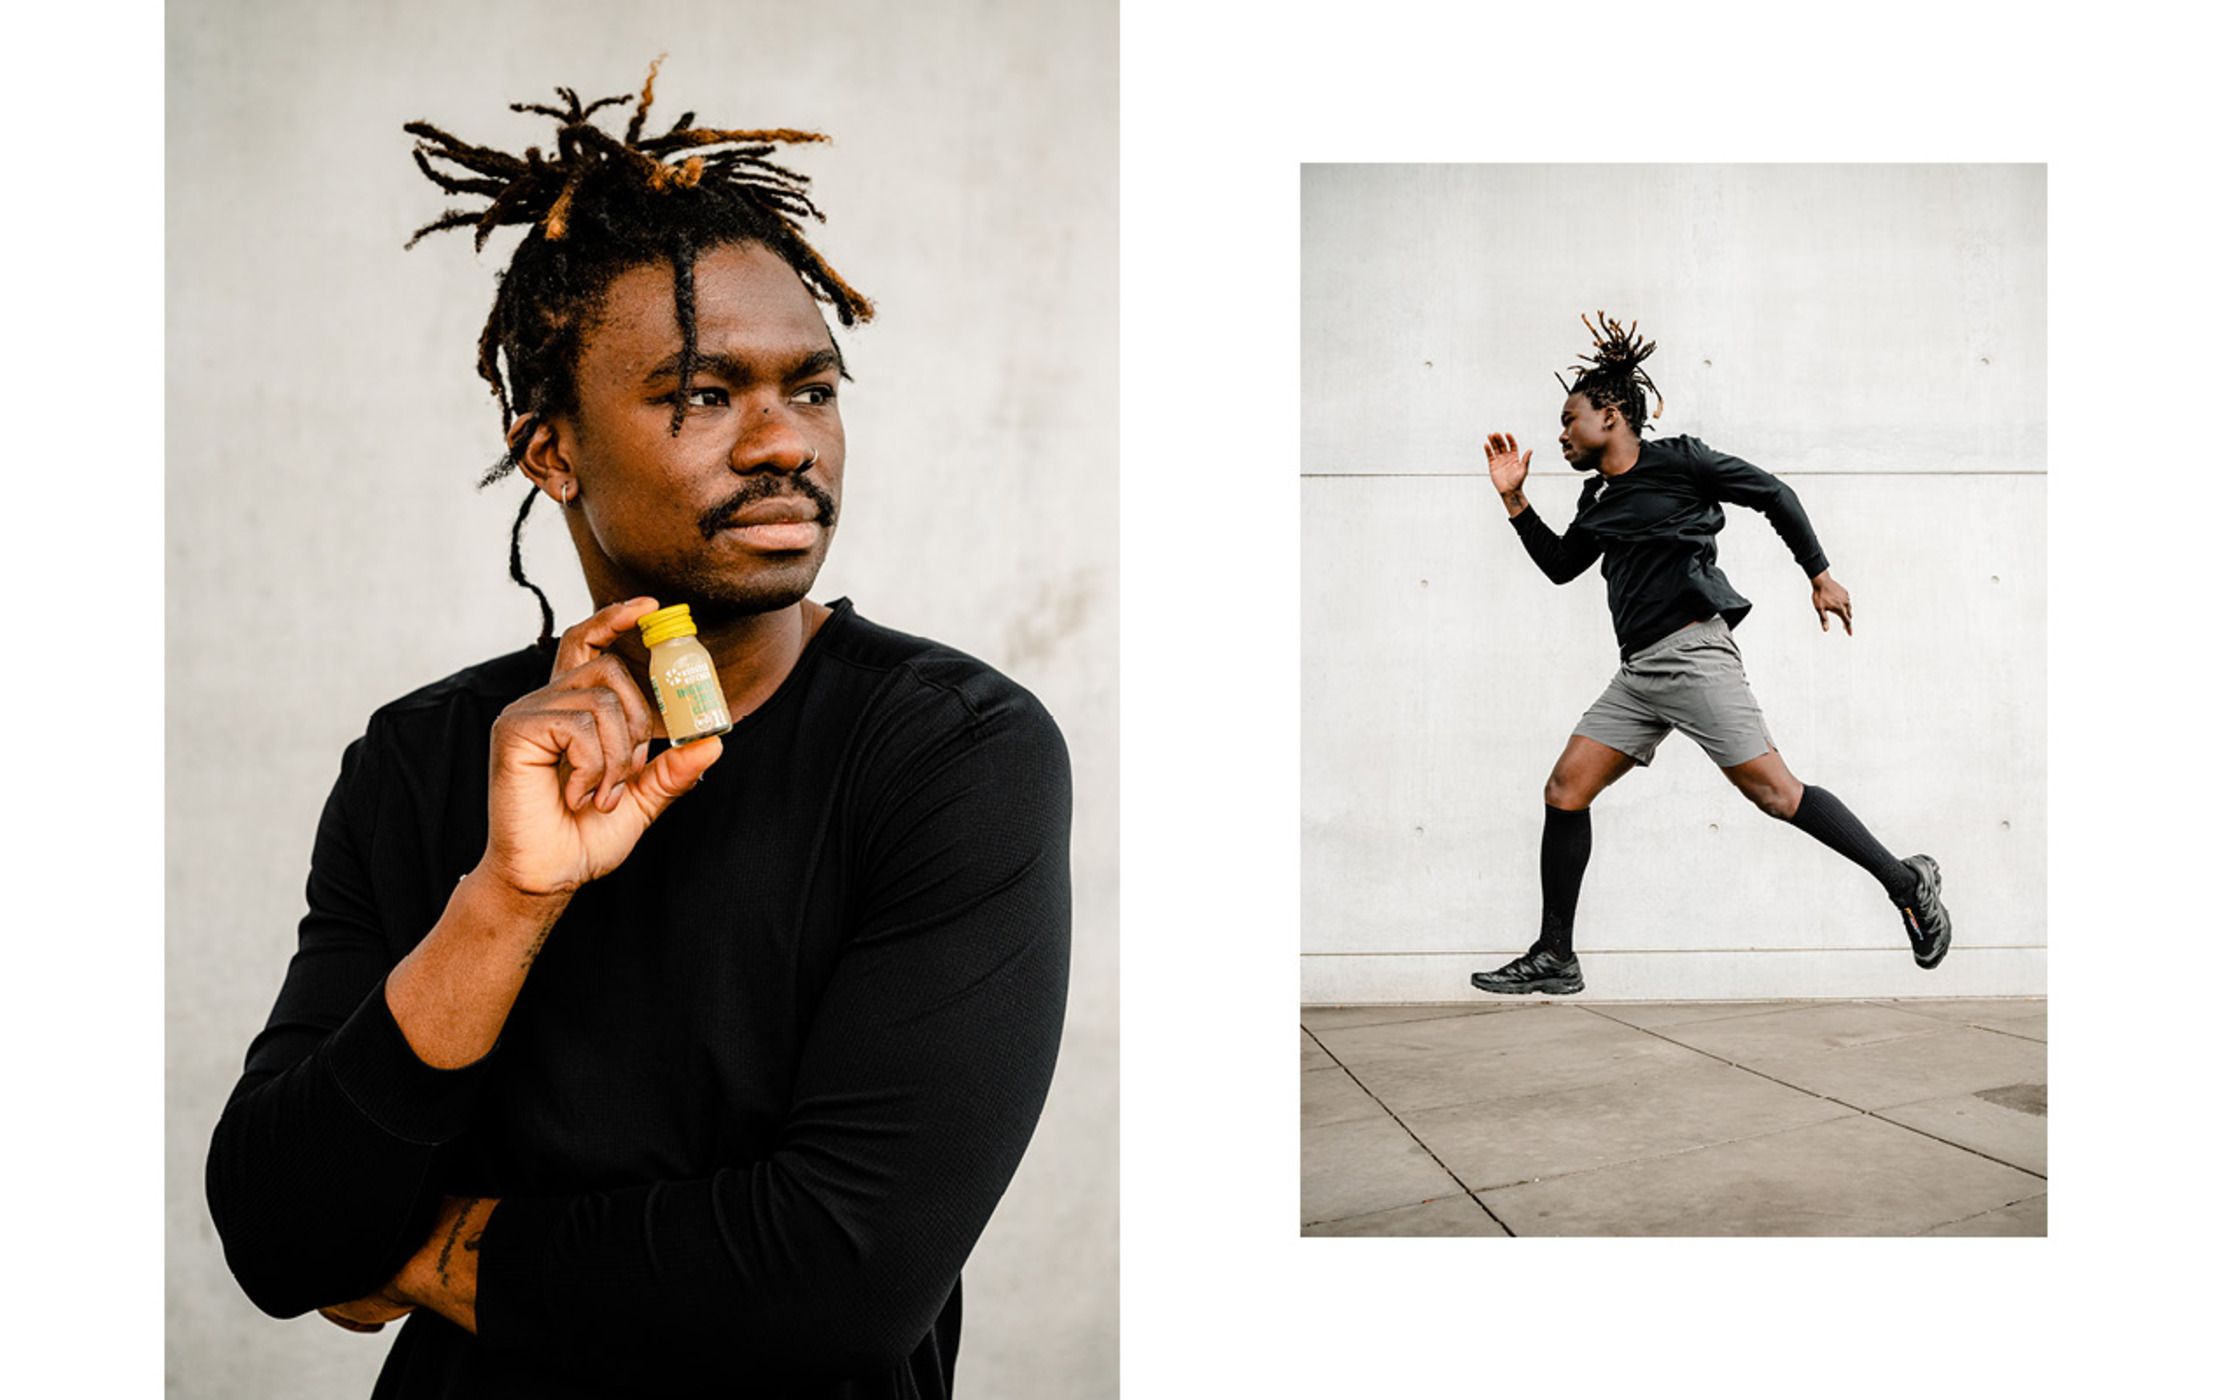 two pictures of a man with dreadlocks jumping and posing for klosterkitchen, with a bottle in the hand